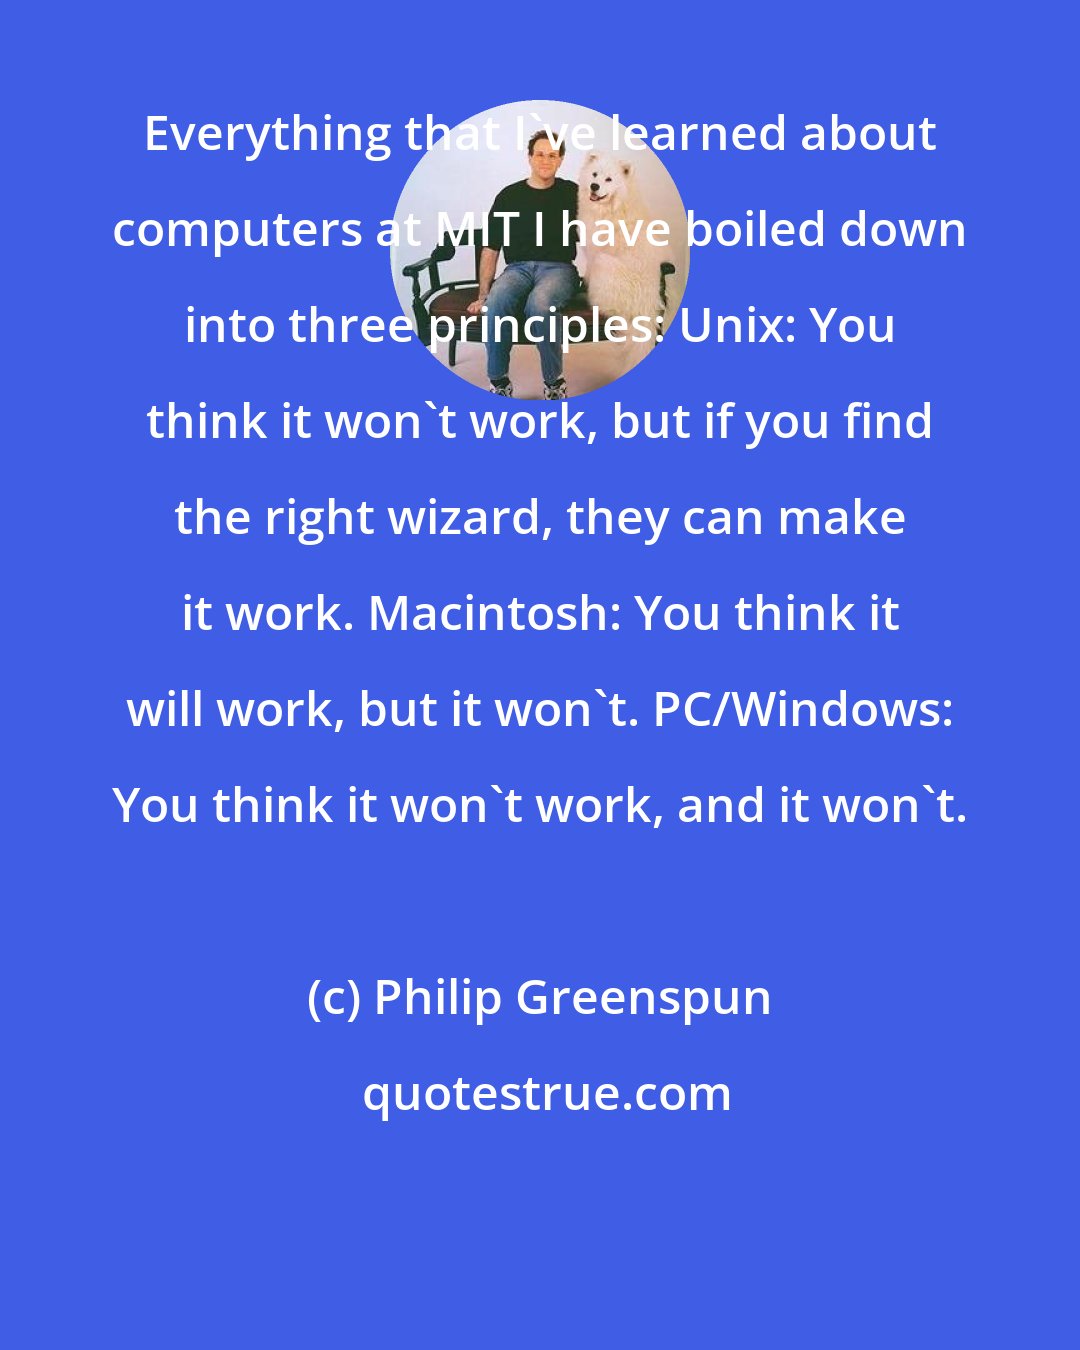 Philip Greenspun: Everything that I've learned about computers at MIT I have boiled down into three principles: Unix: You think it won't work, but if you find the right wizard, they can make it work. Macintosh: You think it will work, but it won't. PC/Windows: You think it won't work, and it won't.